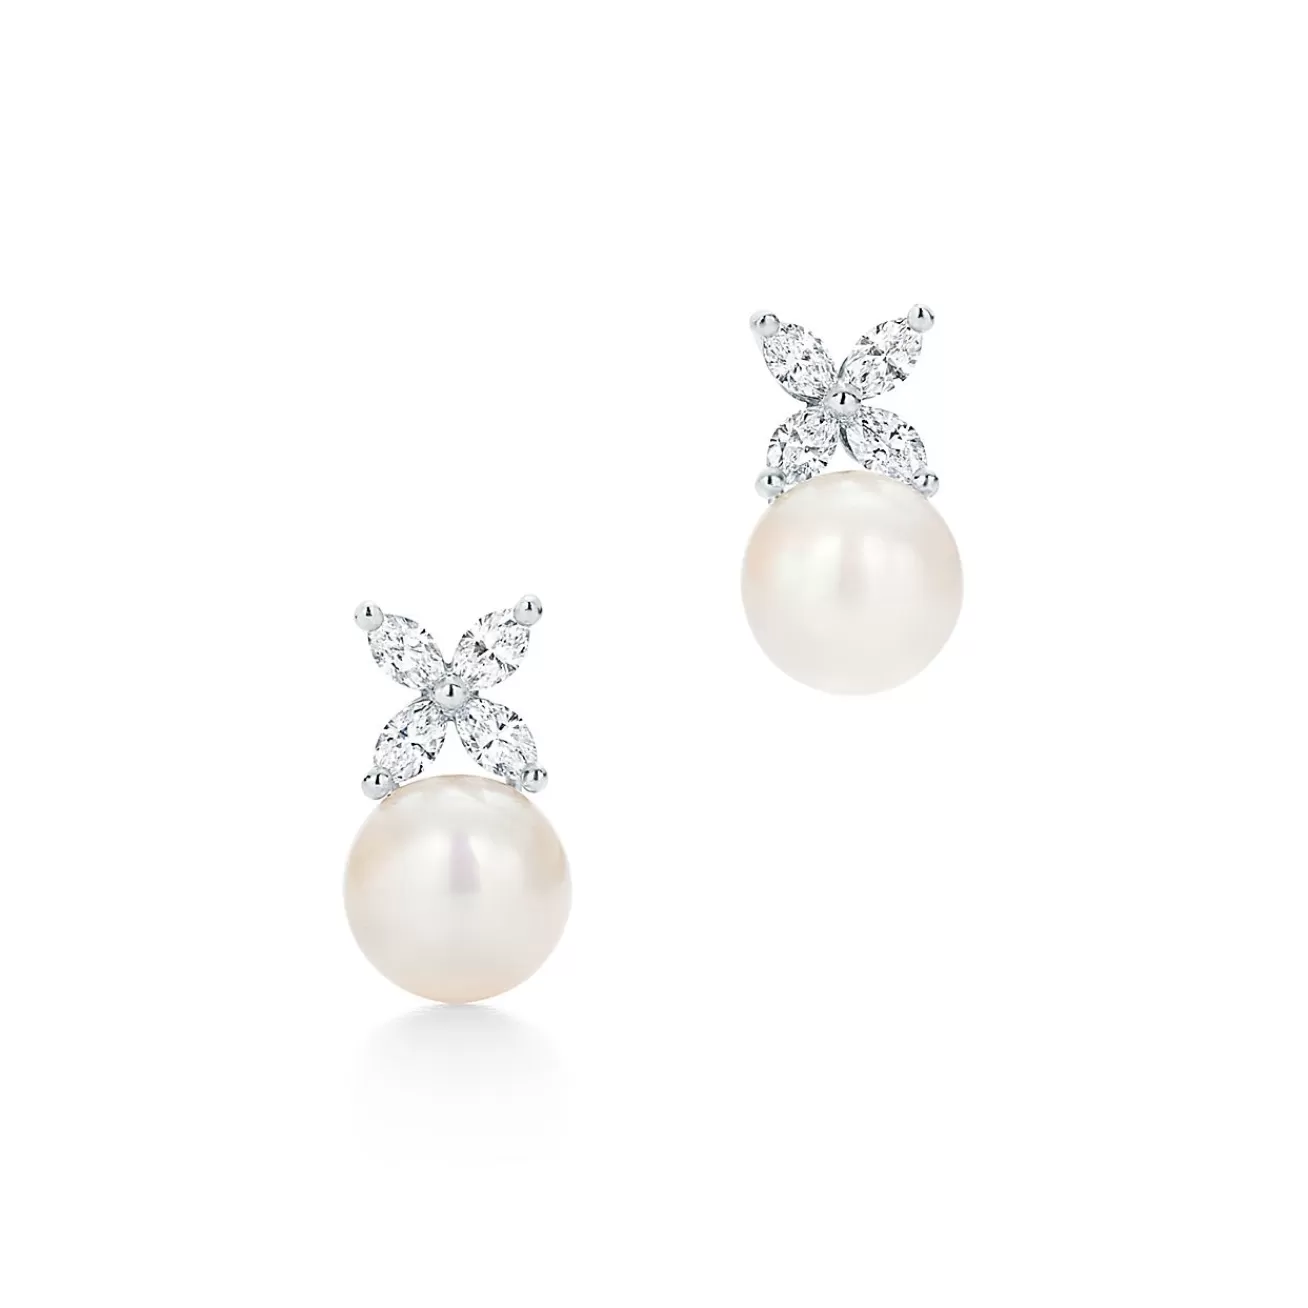 Tiffany & Co. Tiffany Victoria® earrings in platinum with Akoya cultured pearls and diamonds. | ^ Earrings | Gifts for Her